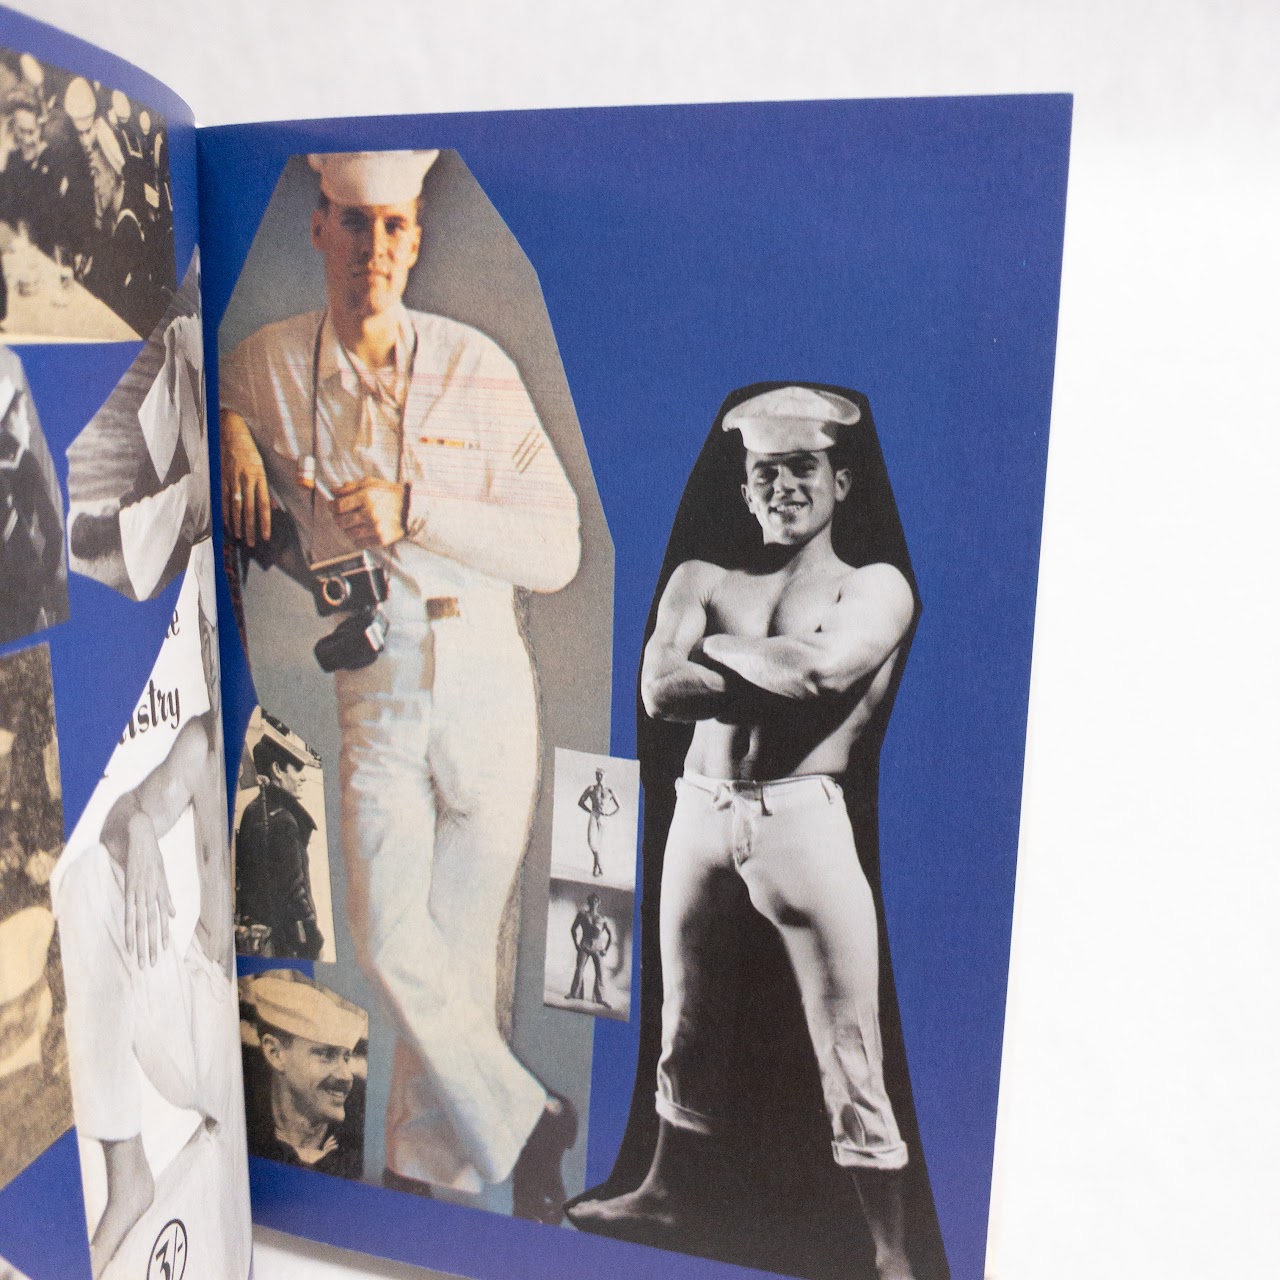 Dian Hanson: The Little Book of TOM of Finland Military Men